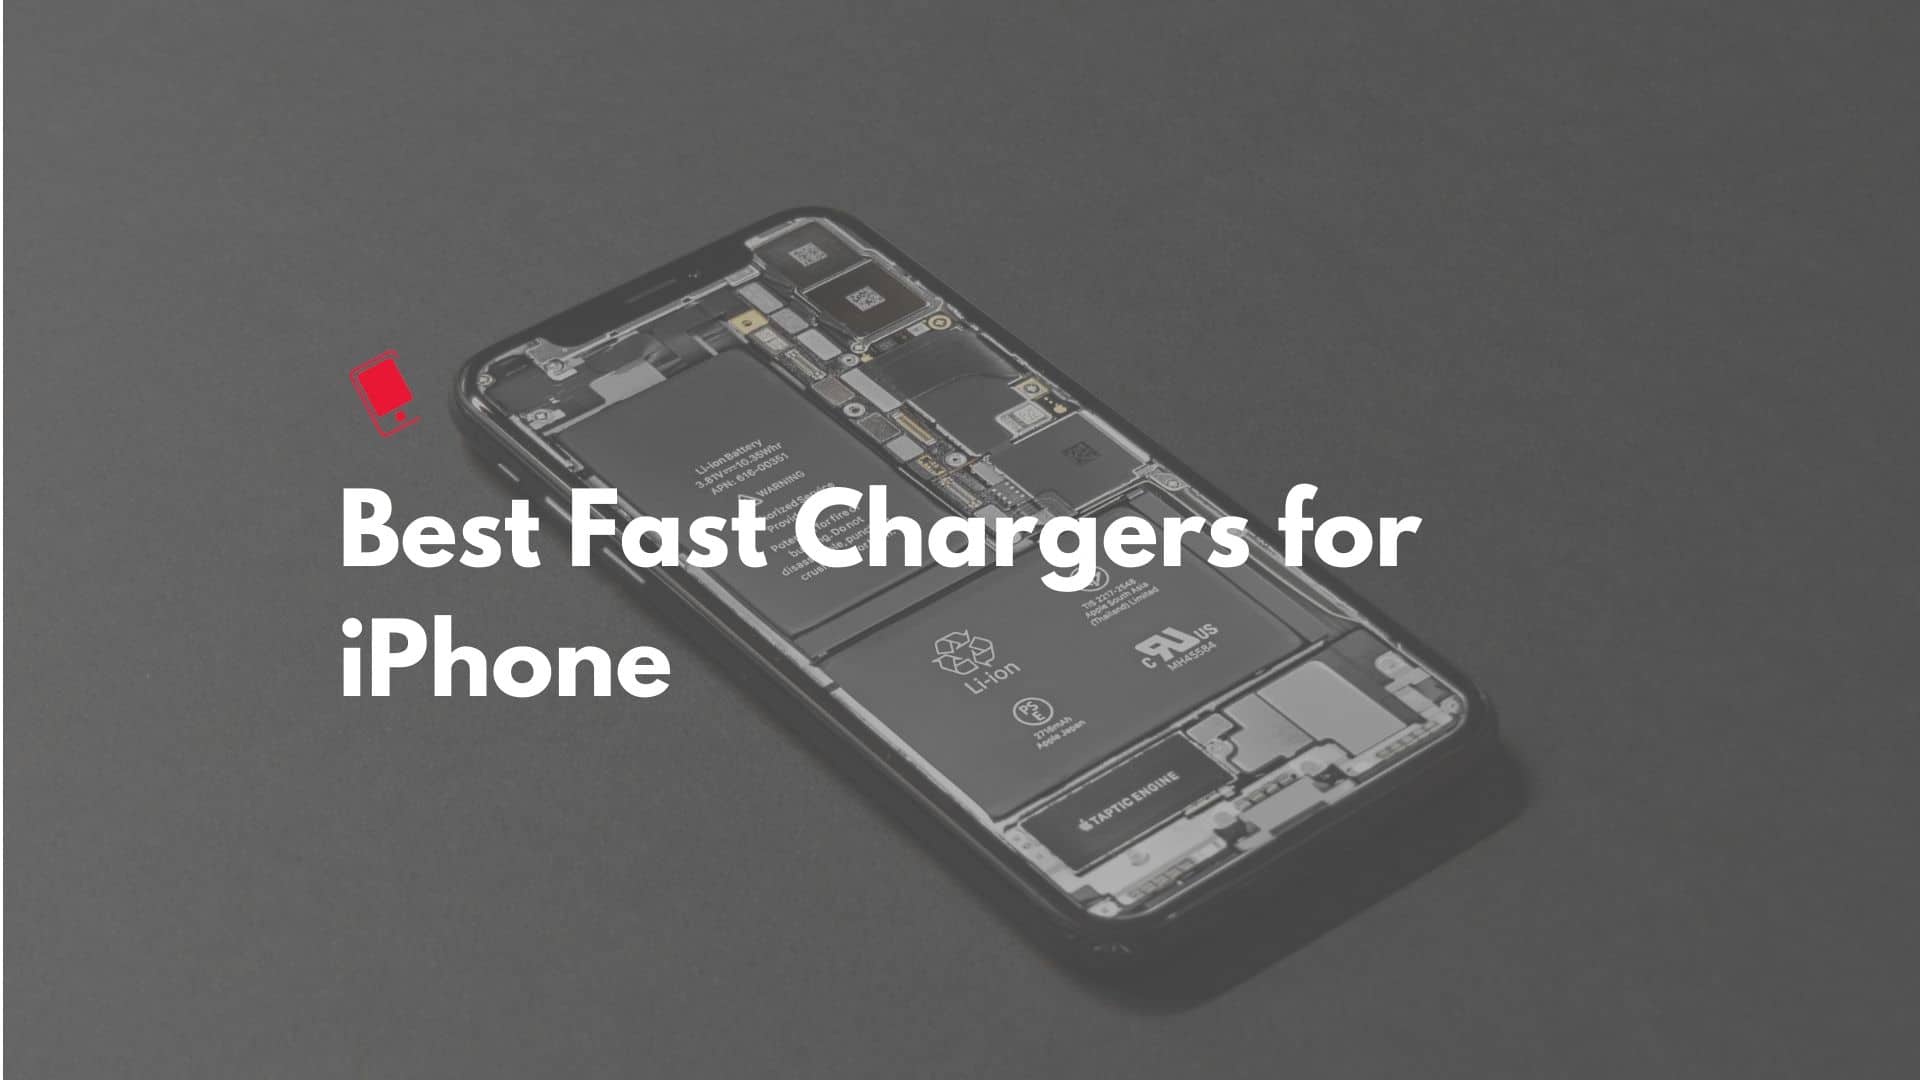 Best iPhone Fast Chargers